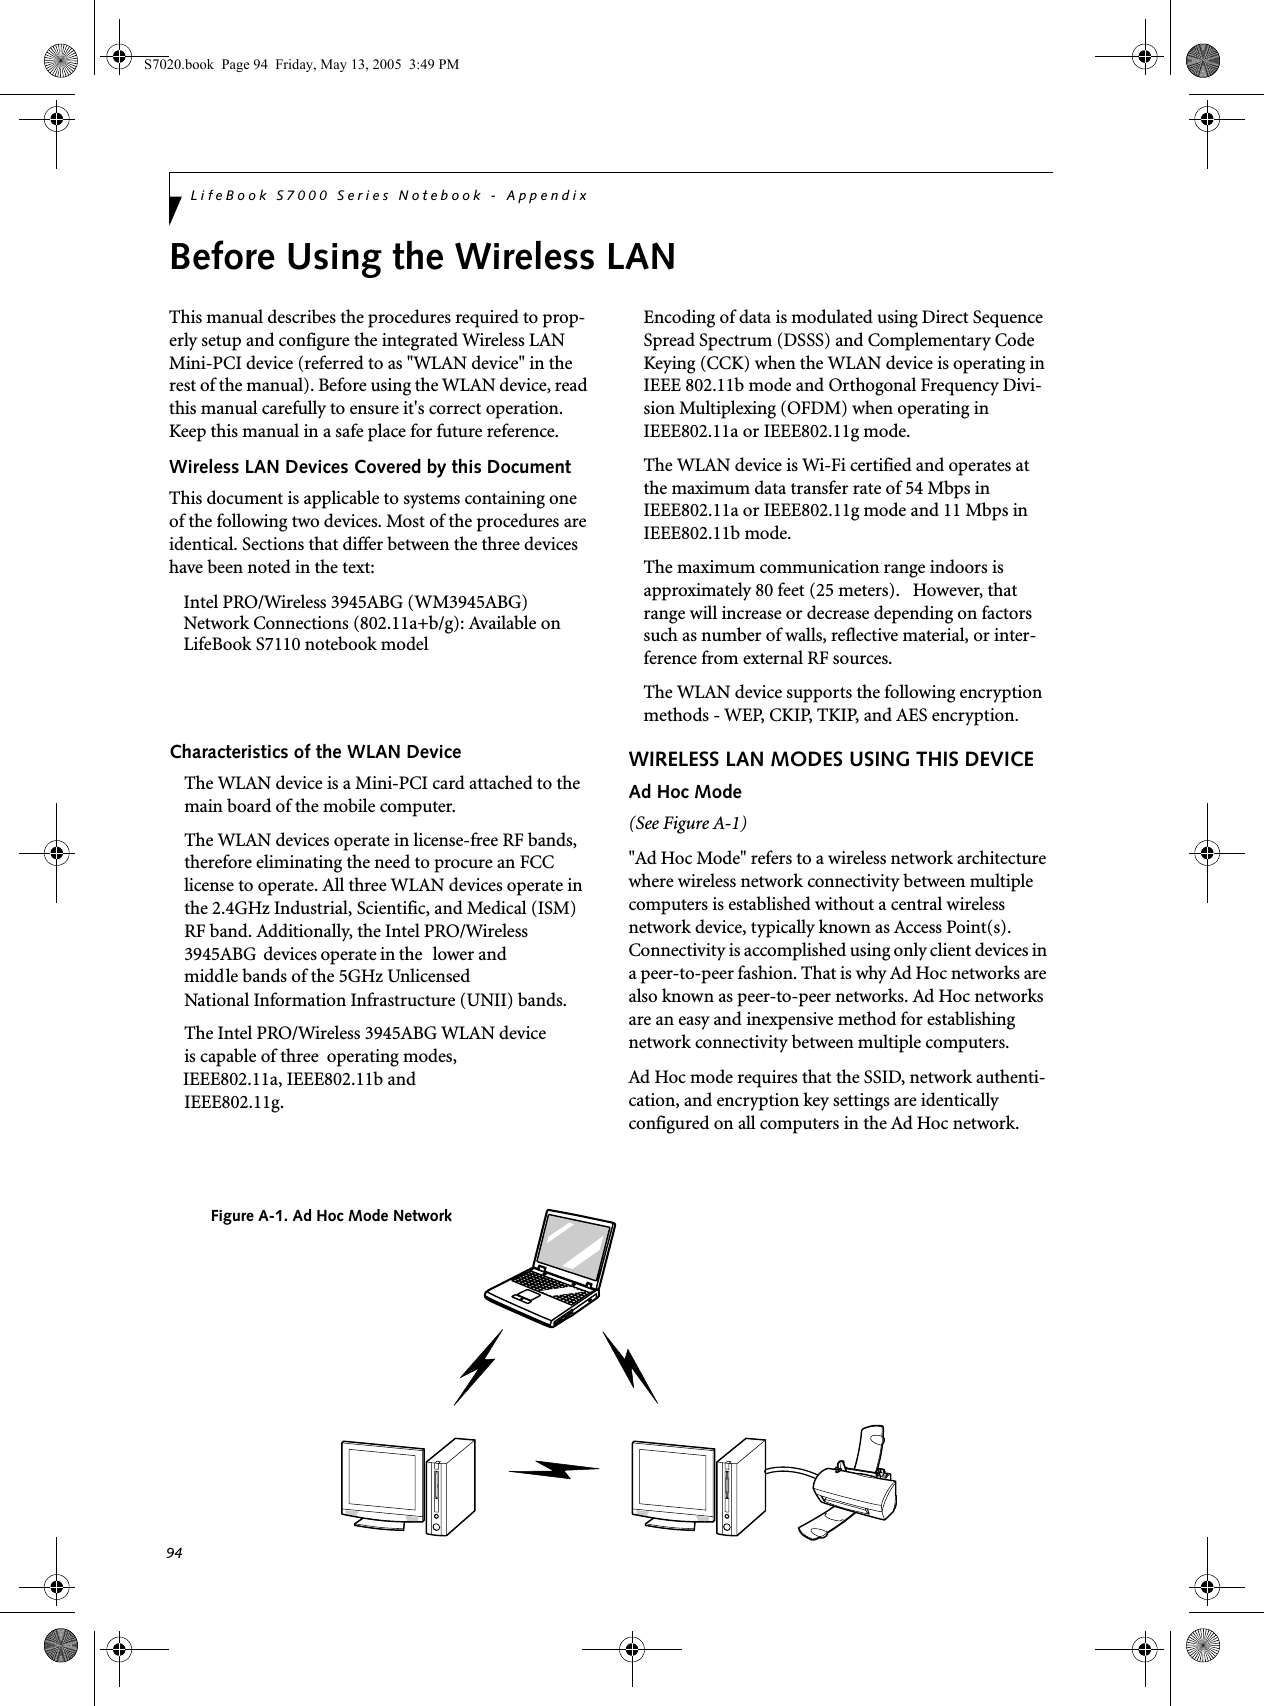 94LifeBook S7000 Series Notebook - AppendixBefore Using the Wireless LANThis manual describes the procedures required to prop-erly setup and configure the integrated Wireless LAN Mini-PCI device (referred to as &quot;WLAN device&quot; in the rest of the manual). Before using the WLAN device, read this manual carefully to ensure it&apos;s correct operation. Keep this manual in a safe place for future reference.Wireless LAN Devices Covered by this DocumentThis document is applicable to systems containing one of the following two devices. Most of the procedures are identical. Sections that differ between the three devices have been noted in the text:Intel PRO/Wireless 3945ABG (WM3945ABG) Network Connections (802.11a+b/g): Available on LifeBook S7110 notebook modelCharacteristics of the WLAN DeviceThe WLAN device is a Mini-PCI card attached to the main board of the mobile computer. The WLAN devices operate in license-free RF bands, therefore eliminating the need to procure an FCC license to operate. All three WLAN devices operate in the 2.4GHz Industrial, Scientific, and Medical (ISM) RF band. Additionally, the Intel PRO/Wireless 3945ABG  devices operate in the   lower and middle bands of the 5GHz Unlicensed National Information Infrastructure (UNII) bands. The Intel PRO/Wireless 3945ABG WLAN device is capable of three     operating modes,  IEEE802.11a, IEEE802.11b and IEEE802.11g. Encoding of data is modulated using Direct Sequence Spread Spectrum (DSSS) and Complementary Code Keying (CCK) when the WLAN device is operating in IEEE 802.11b mode and Orthogonal Frequency Divi-sion Multiplexing (OFDM) when operating in IEEE802.11a or IEEE802.11g mode. The WLAN device is Wi-Fi certified and operates at the maximum data transfer rate of 54 Mbps in IEEE802.11a or IEEE802.11g mode and 11 Mbps in IEEE802.11b mode.The maximum communication range indoors is approximately 80 feet (25 meters).   However, that range will increase or decrease depending on factors such as number of walls, reflective material, or inter-ference from external RF sources.The WLAN device supports the following encryption methods - WEP, CKIP, TKIP, and AES encryption.WIRELESS LAN MODES USING THIS DEVICEAd Hoc Mode (See Figure A-1)&quot;Ad Hoc Mode&quot; refers to a wireless network architecture where wireless network connectivity between multiple computers is established without a central wireless network device, typically known as Access Point(s). Connectivity is accomplished using only client devices in a peer-to-peer fashion. That is why Ad Hoc networks are also known as peer-to-peer networks. Ad Hoc networks are an easy and inexpensive method for establishing network connectivity between multiple computers.Ad Hoc mode requires that the SSID, network authenti-cation, and encryption key settings are identically configured on all computers in the Ad Hoc network. Figure A-1. Ad Hoc Mode NetworkS7020.book  Page 94  Friday, May 13, 2005  3:49 PM